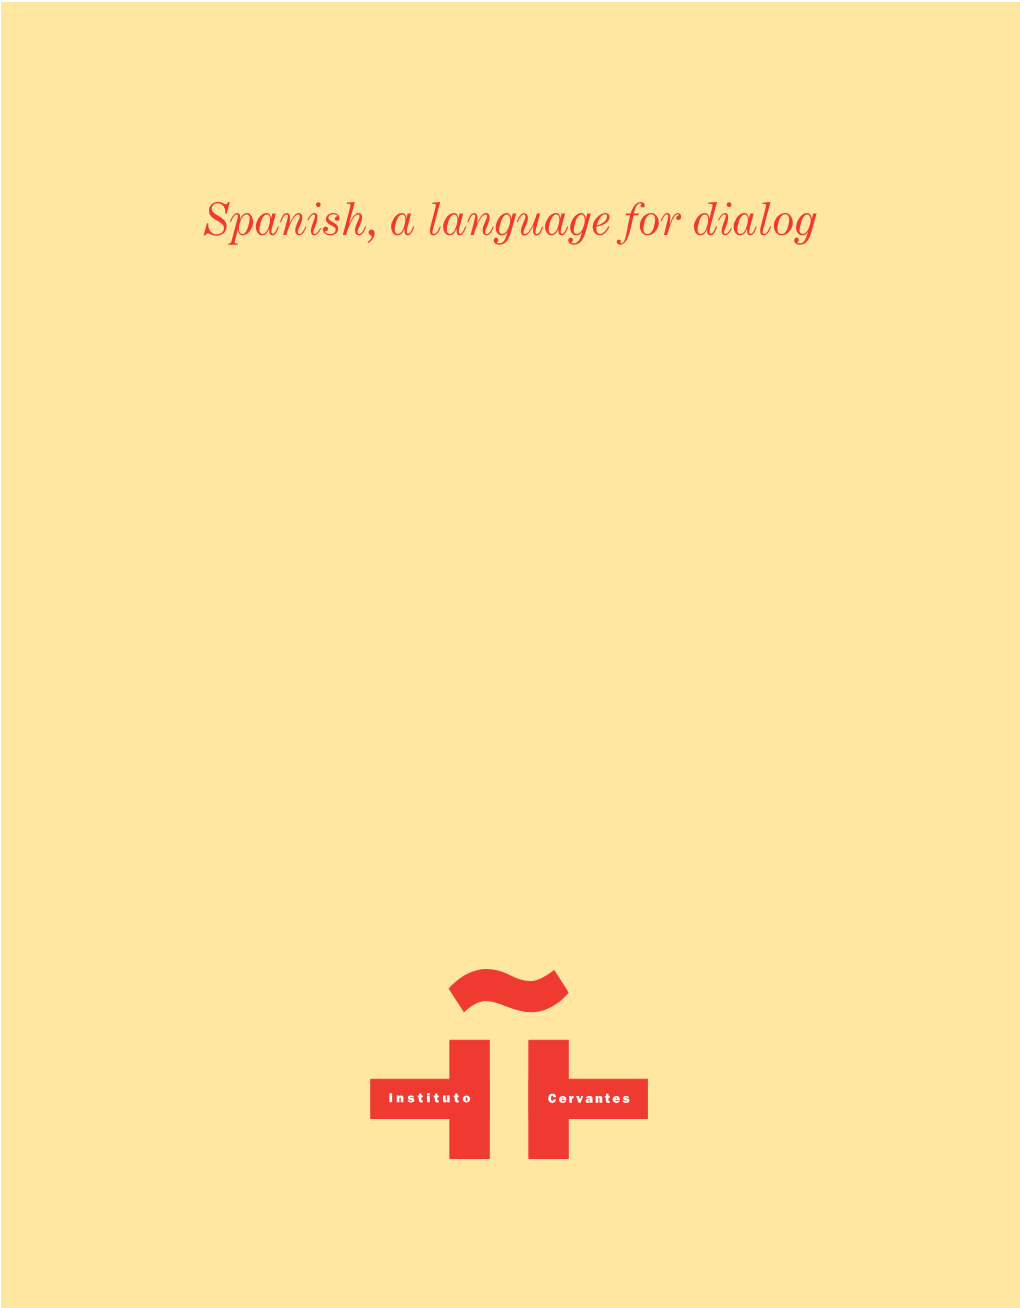 Spanish, a Language for Dialog Honorary President of the Instituto Cervantes Trust His Majesty the King of Spain Juan Carlos I